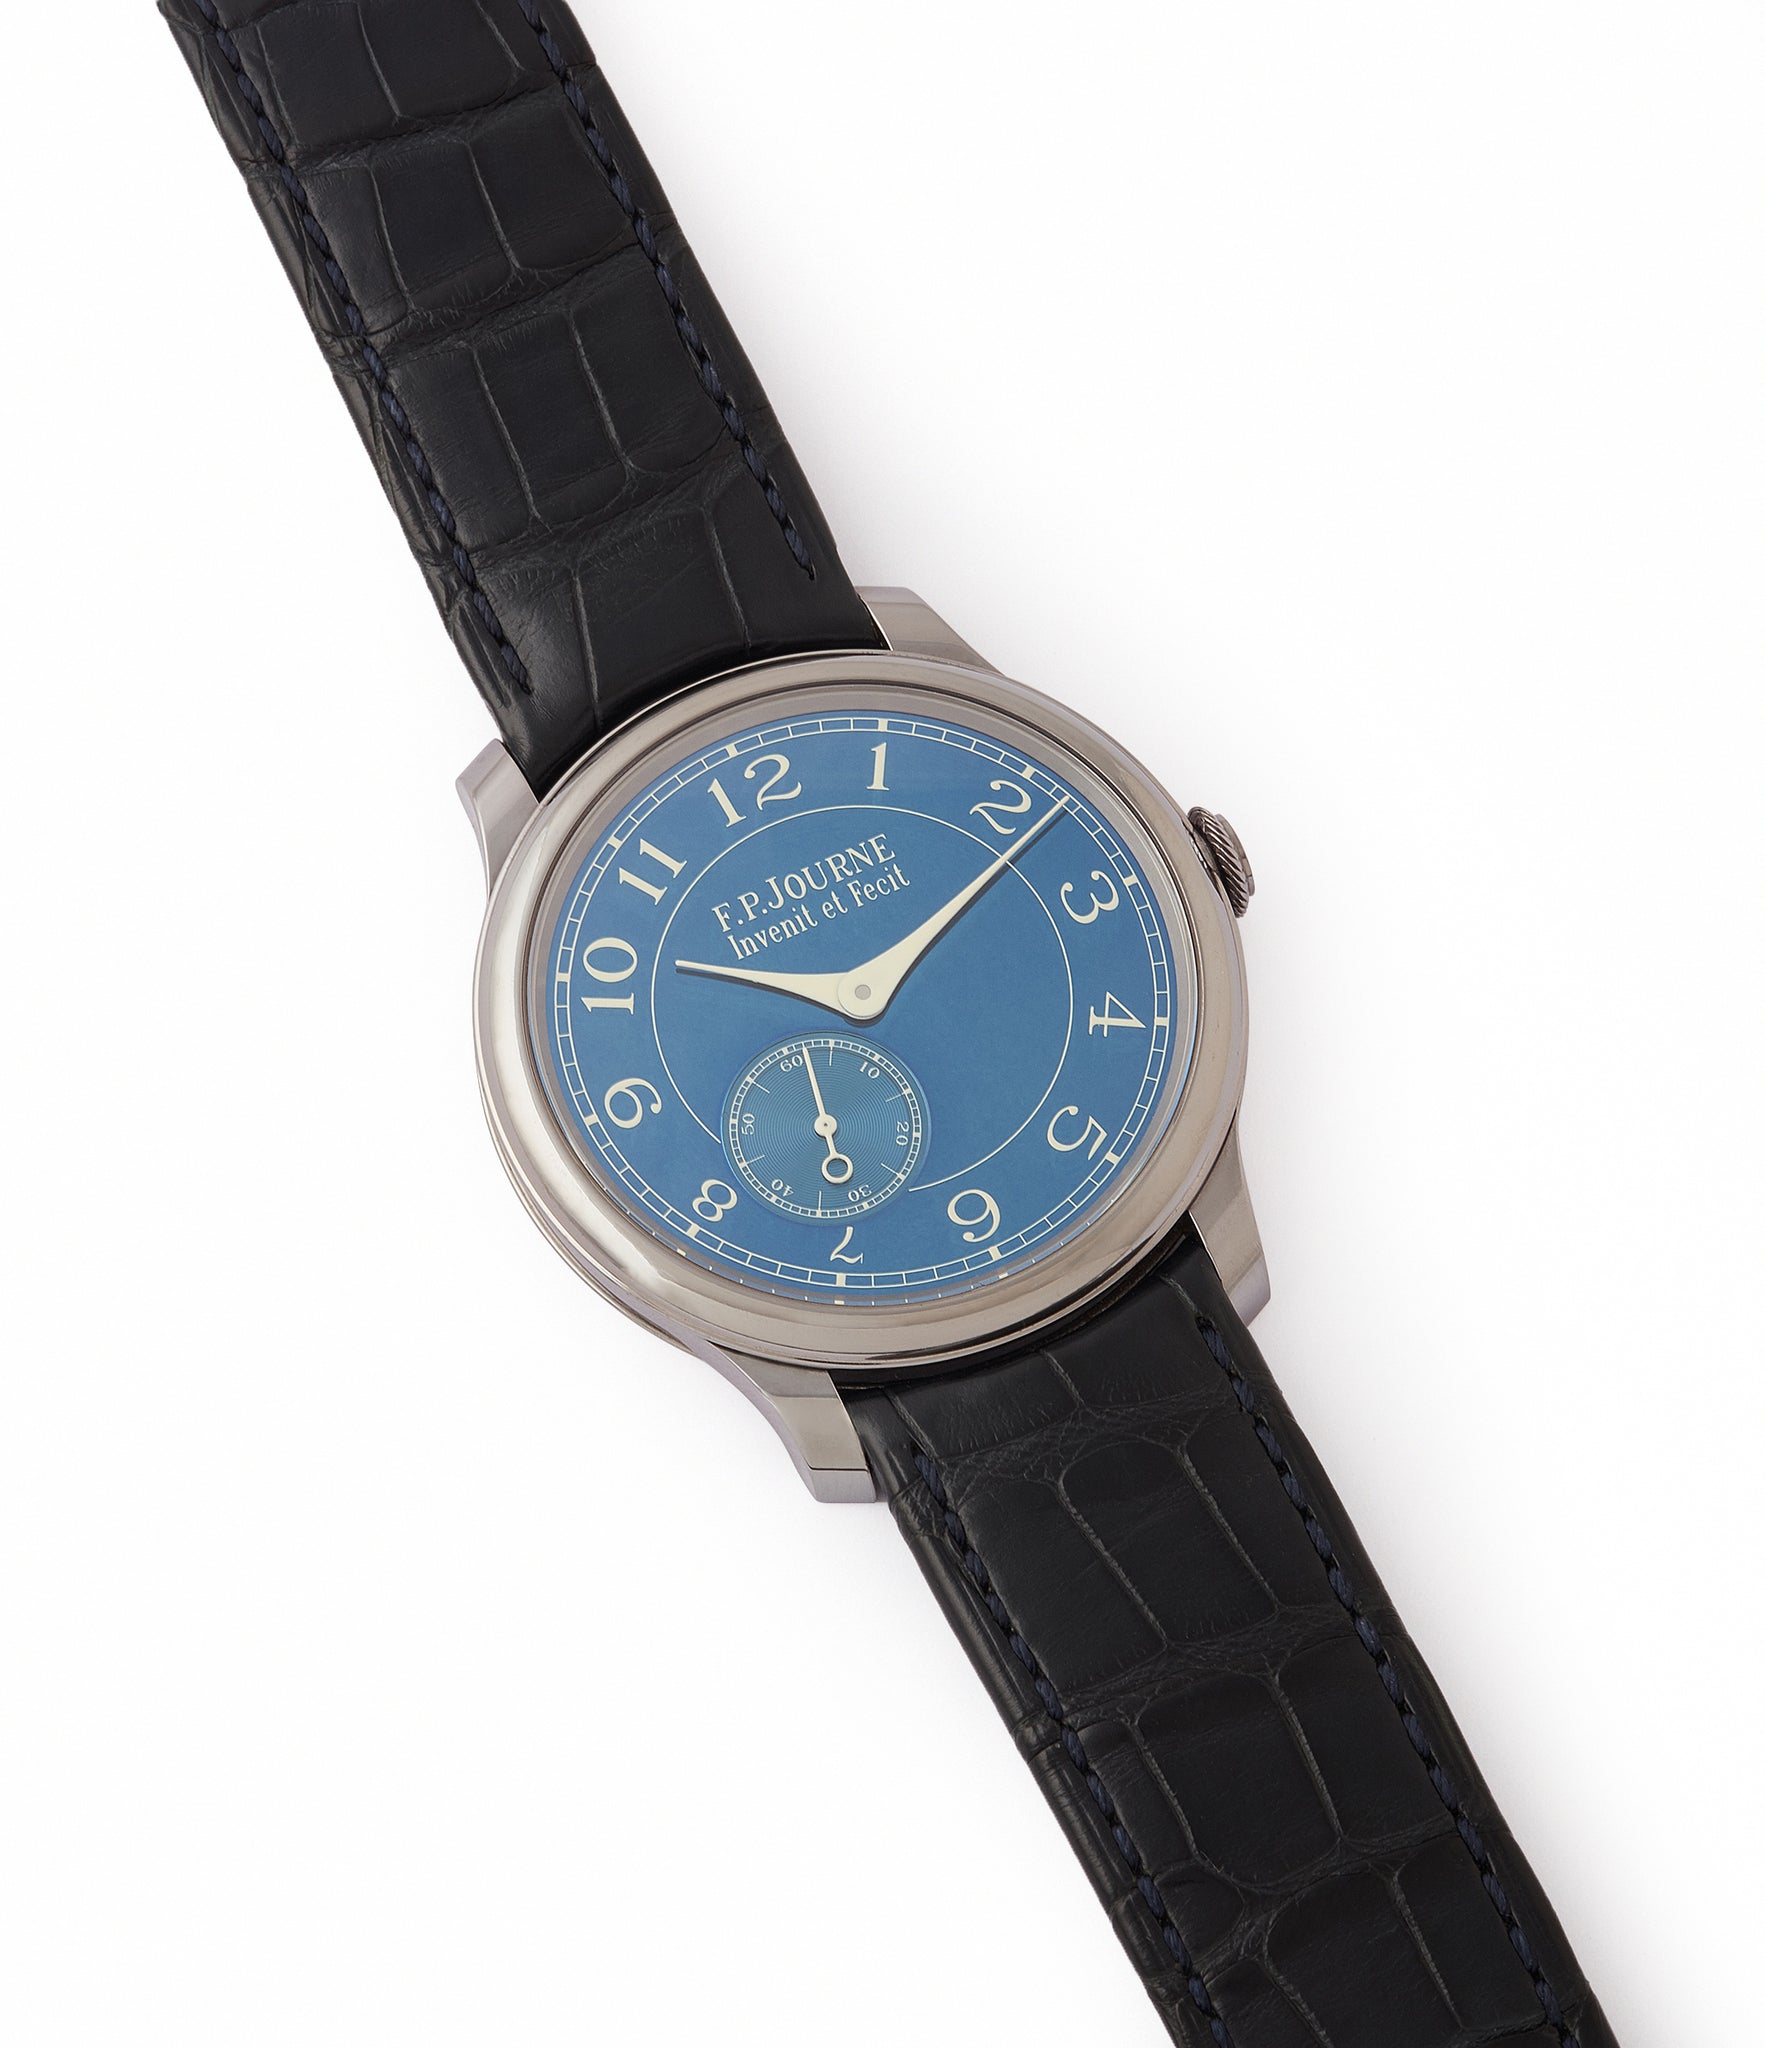 selling pre-owned F. P. Journe Chronometre Bleu tantalum blue dial rare dress watch for sale online at A Collected Man London approved reseller of independent watchmakers